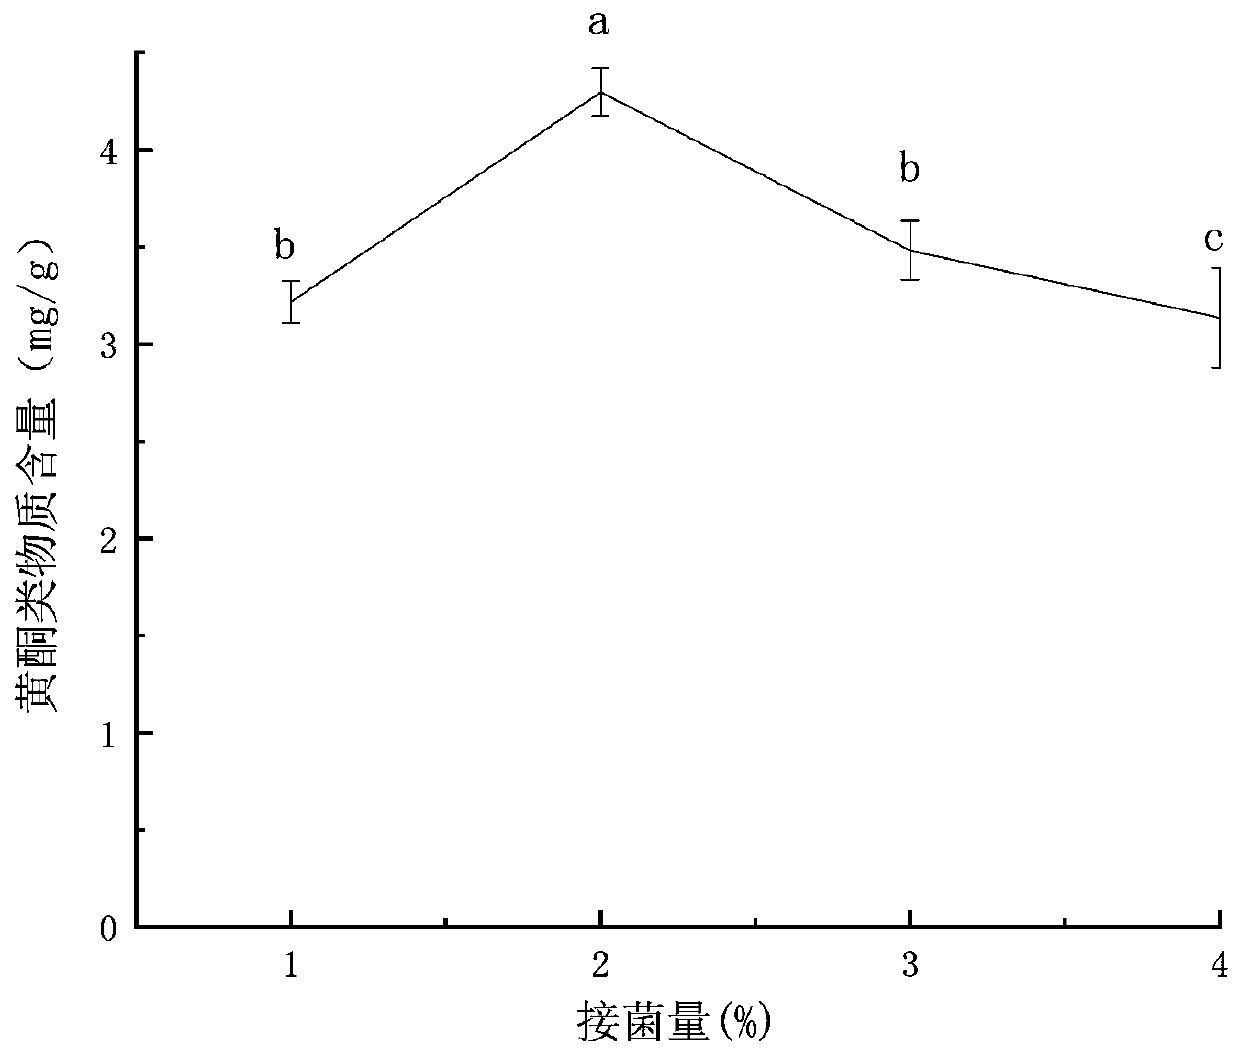 Method for producing flavonoid substances by fermenting vegetable soybean off-grade goods with bacillus natto